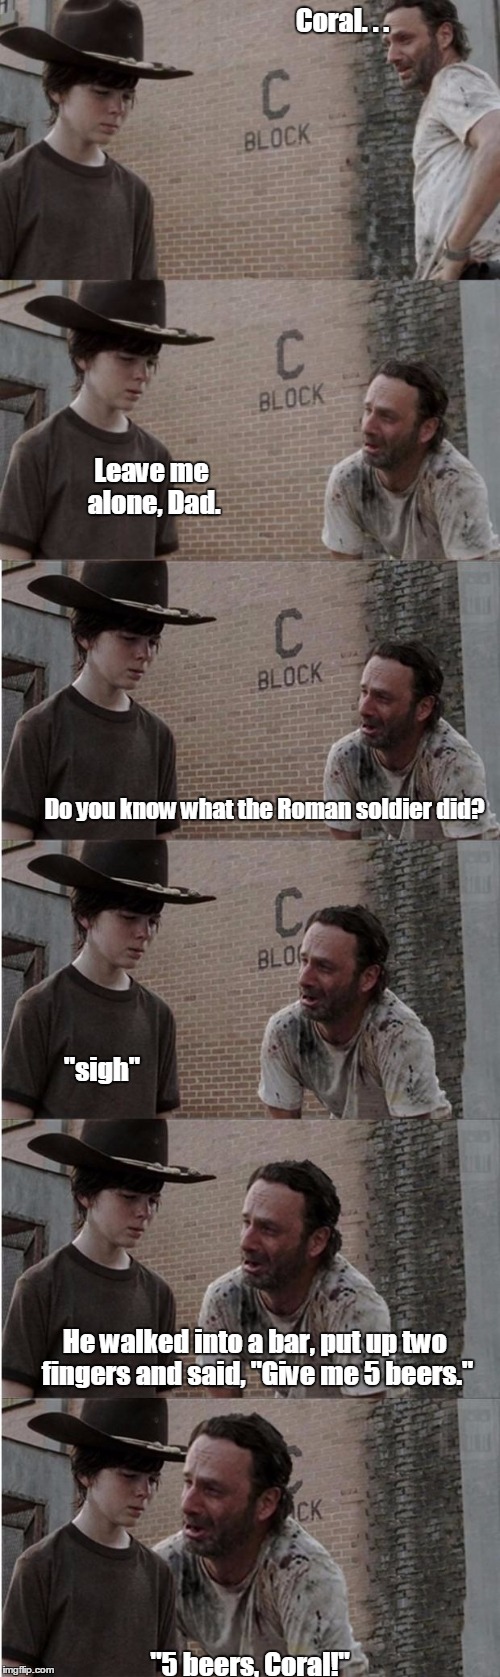 Rick and Carl Longer | Coral. . . "5 beers, Coral!" Leave me alone, Dad. Do you know what the Roman soldier did? "sigh" He walked into a bar, put up two fingers an | image tagged in memes,rick and carl longer | made w/ Imgflip meme maker